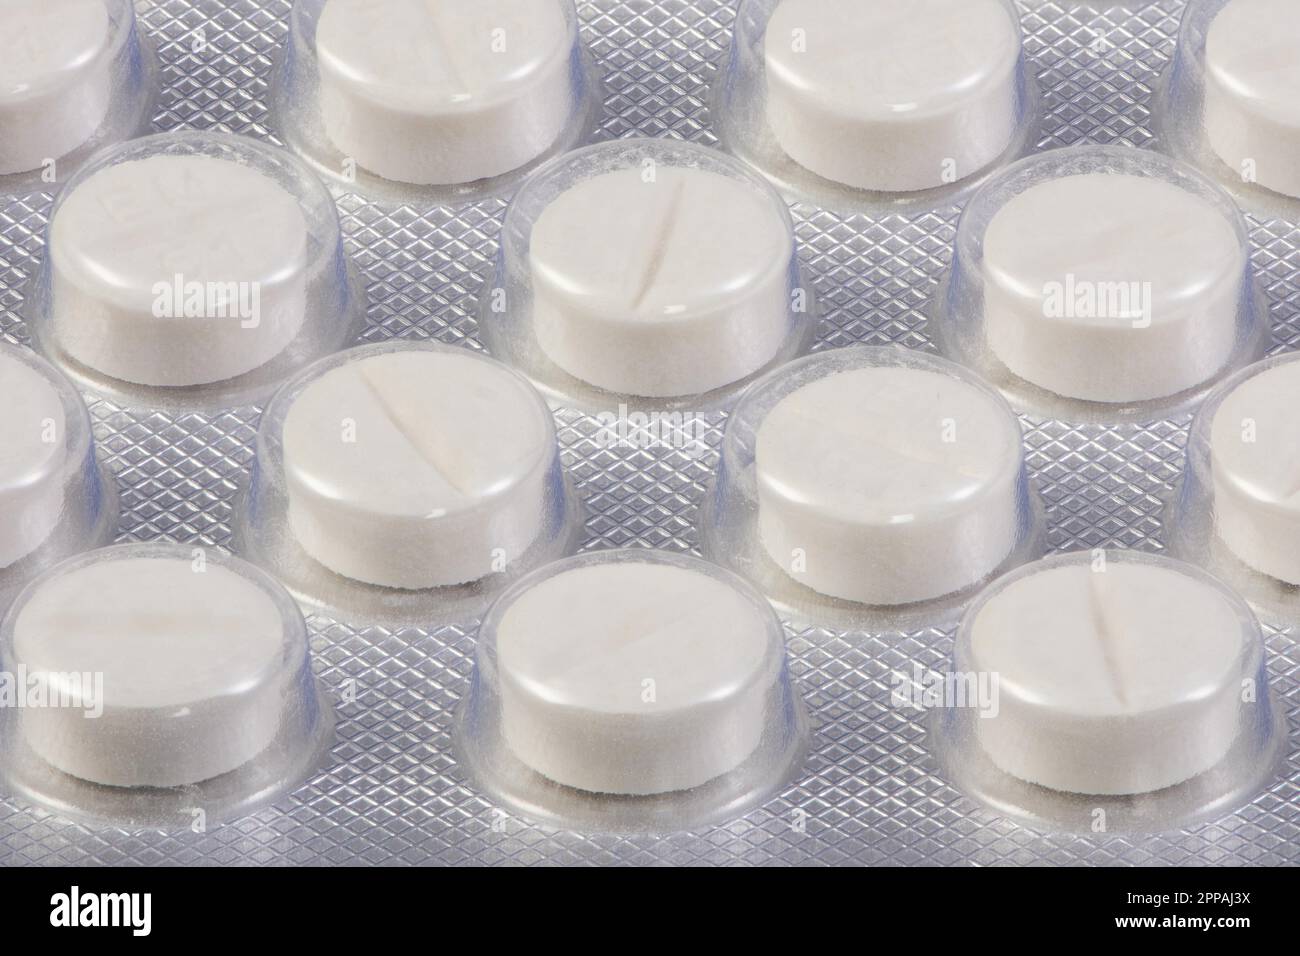 Blister pack with white painkiller tablets Stock Photo